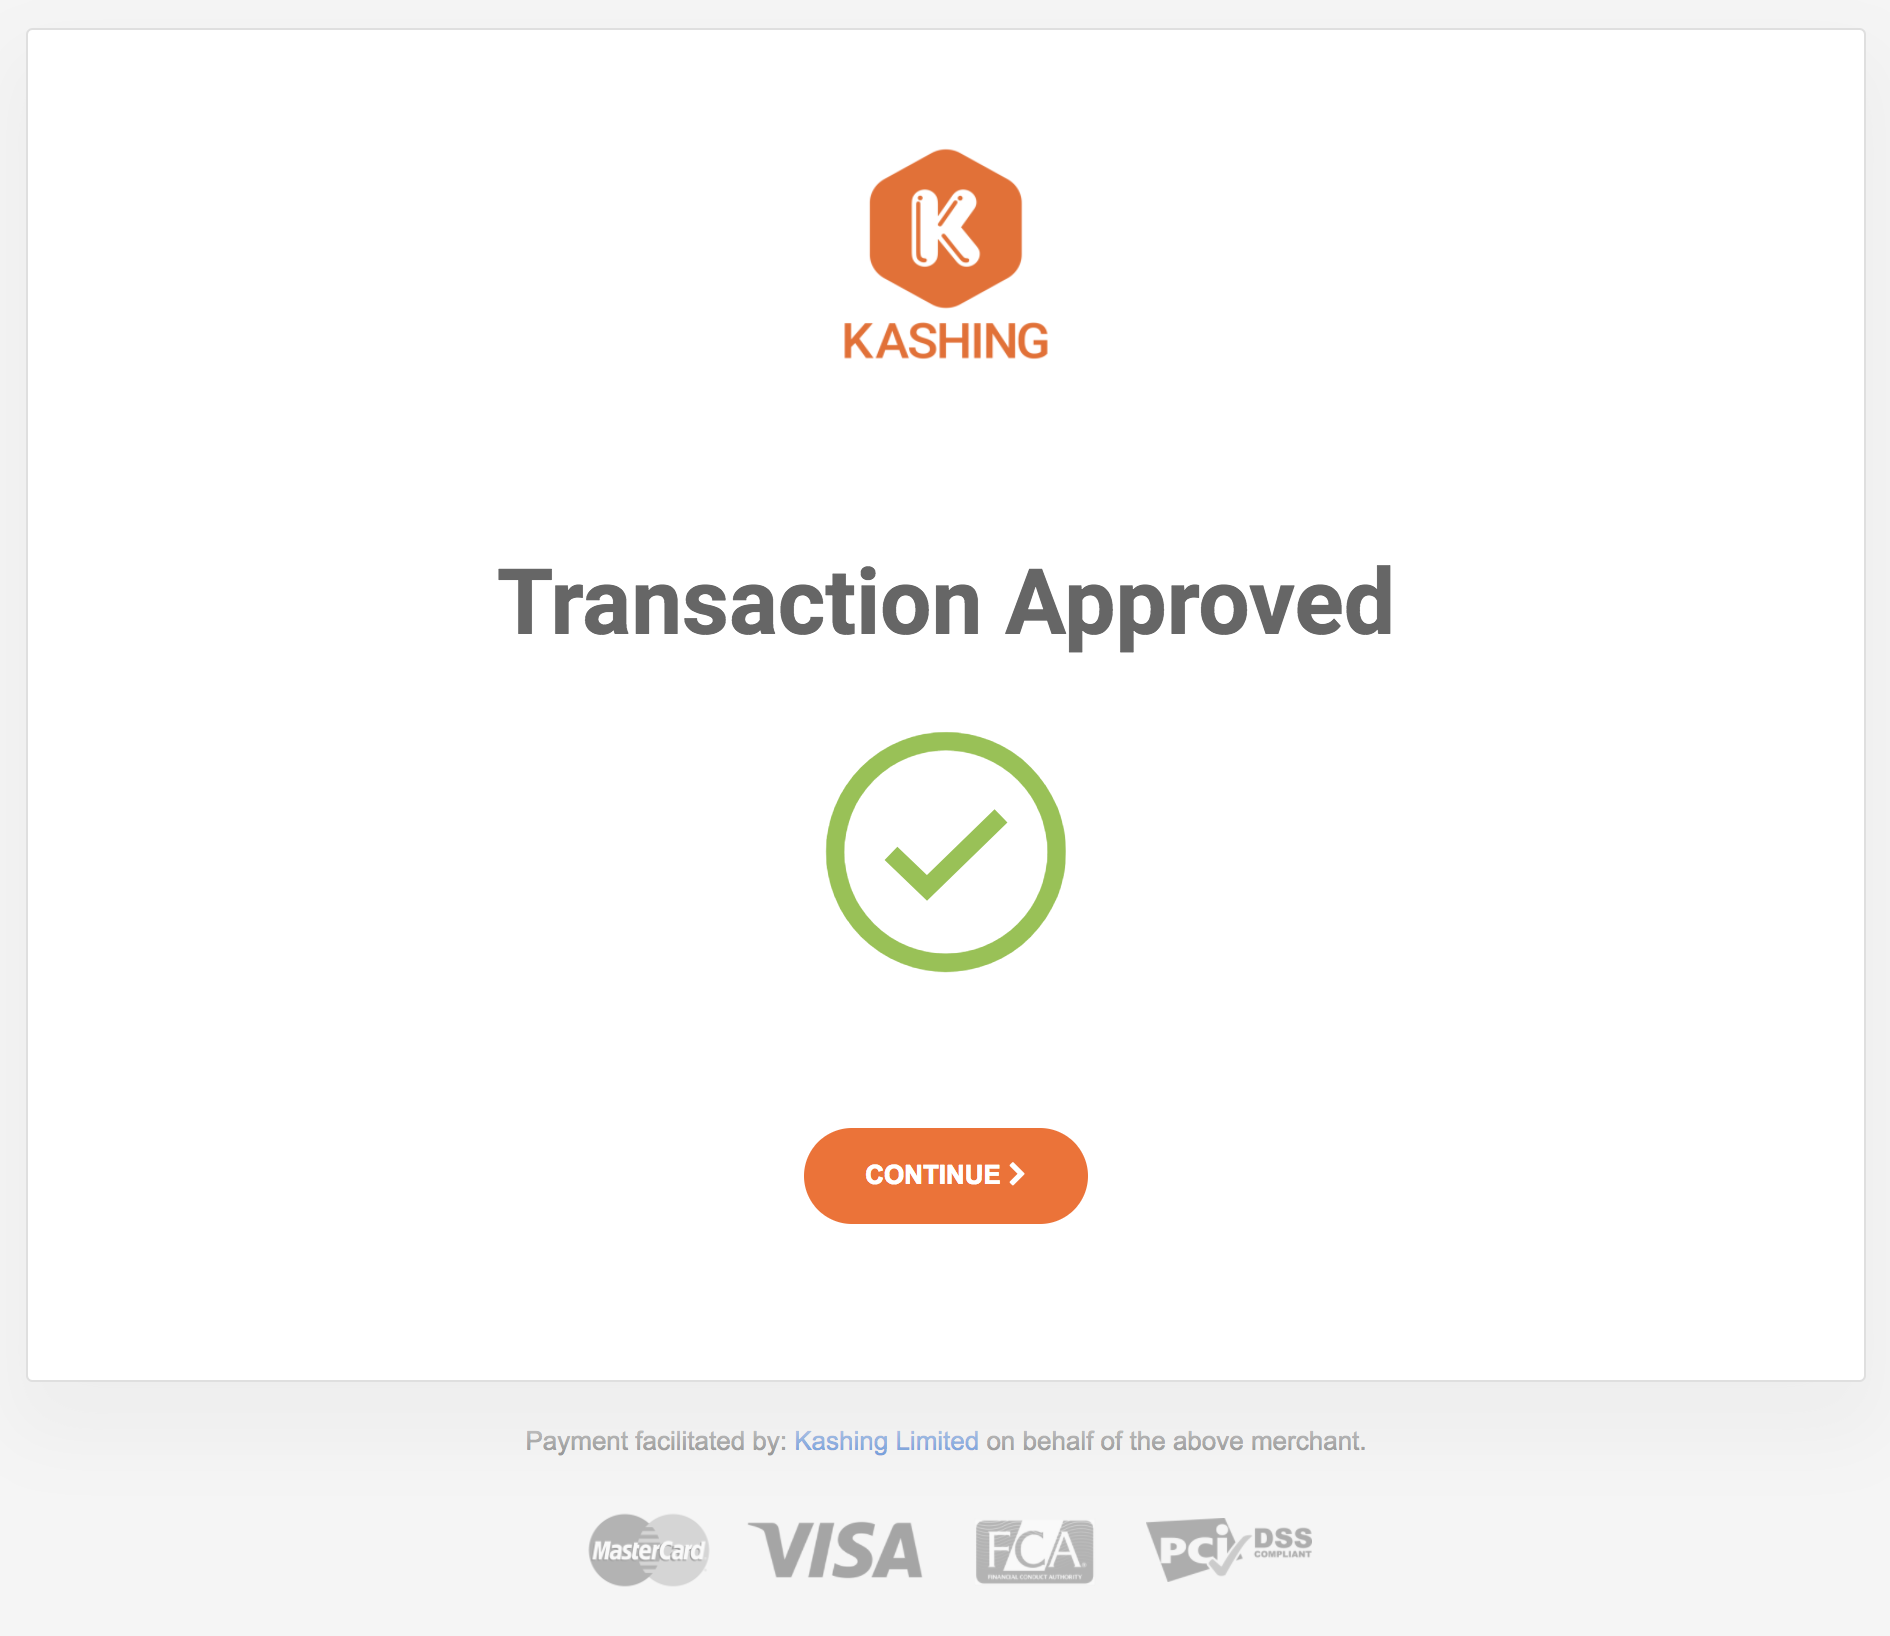 Transaction Approved message in the Kashing Payment Gateway. After clicking Continue, person is redirected back to your WooCommerce website that displays an information about the transaction success.